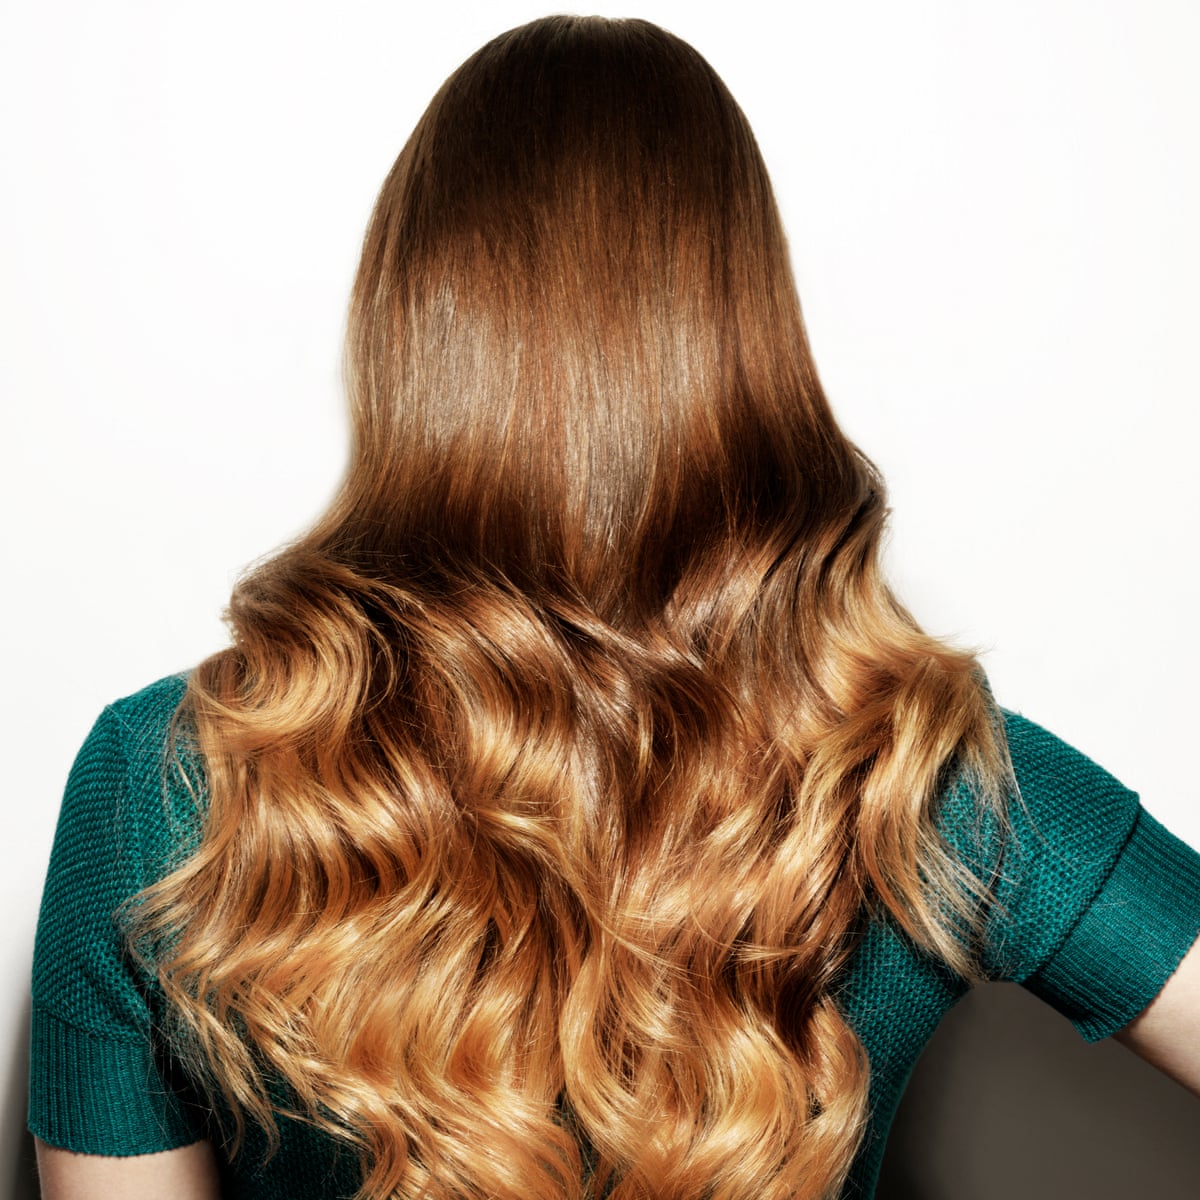 Seven ways to get shiny, healthy hair  Health & wellbeing  The Guardian